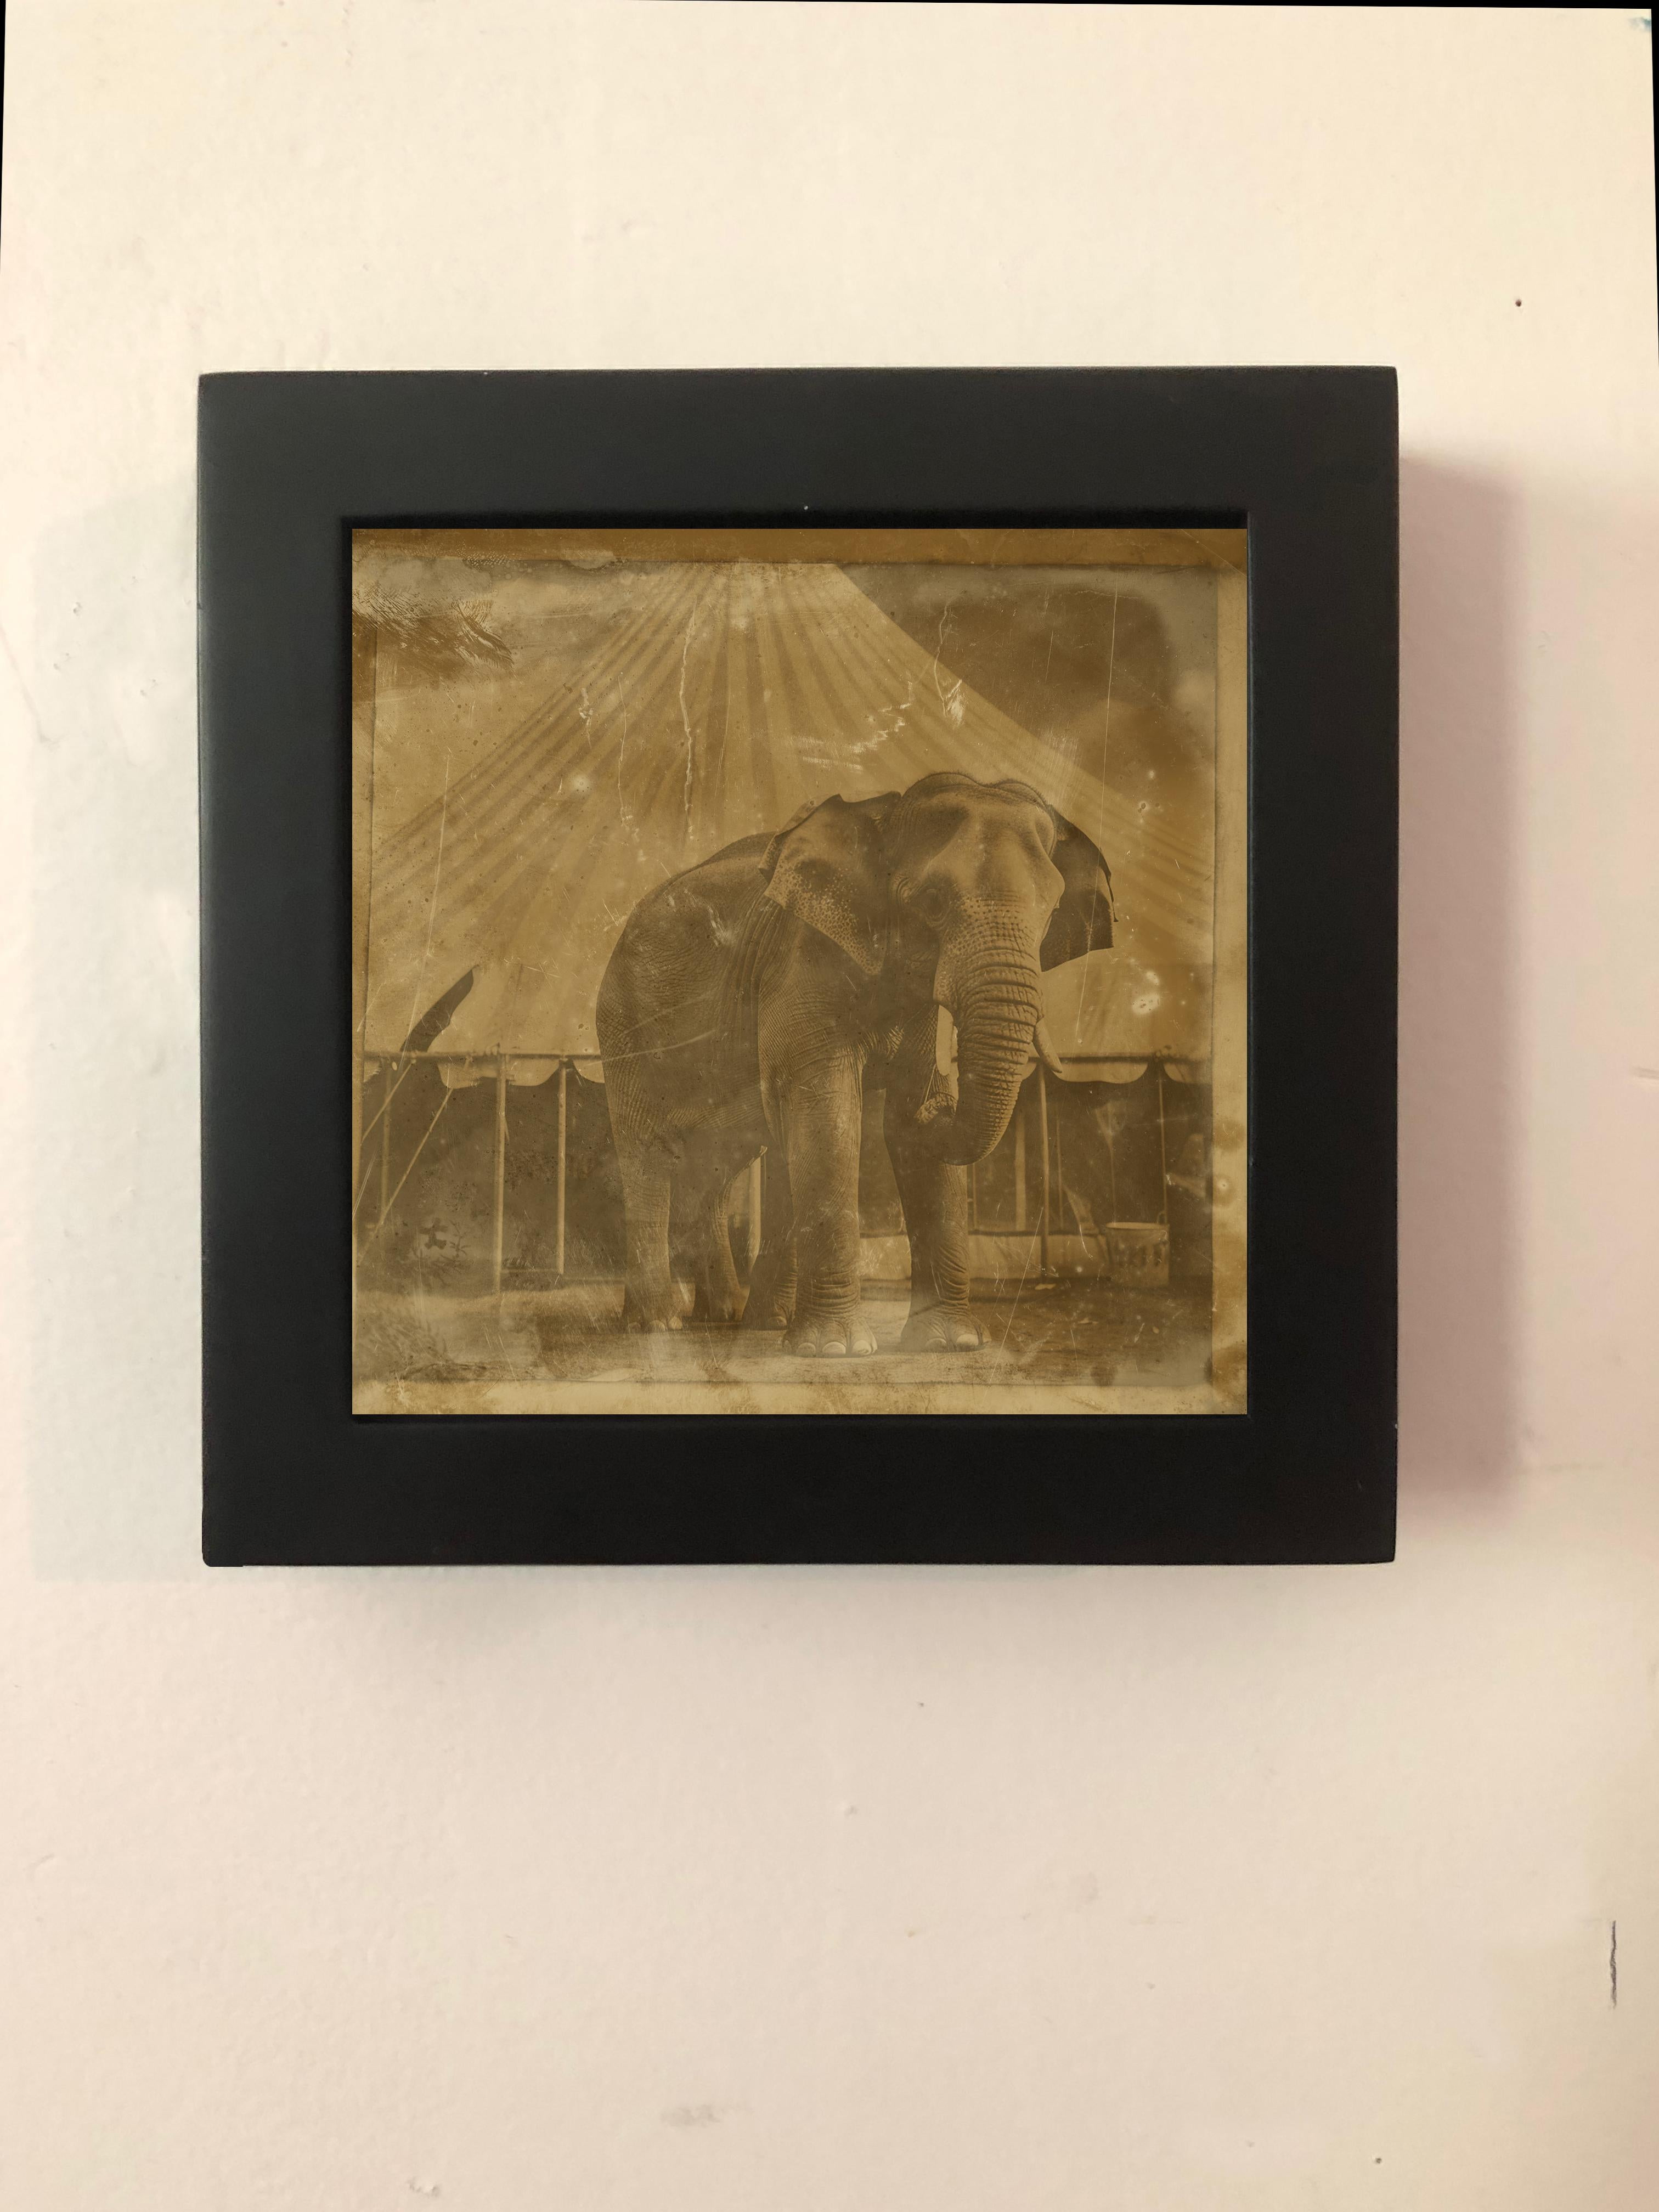 Bingo the Circus Elephant  circus series enchanting daguerreotype reproduction - Photograph by FPA Francis Pavy Artist